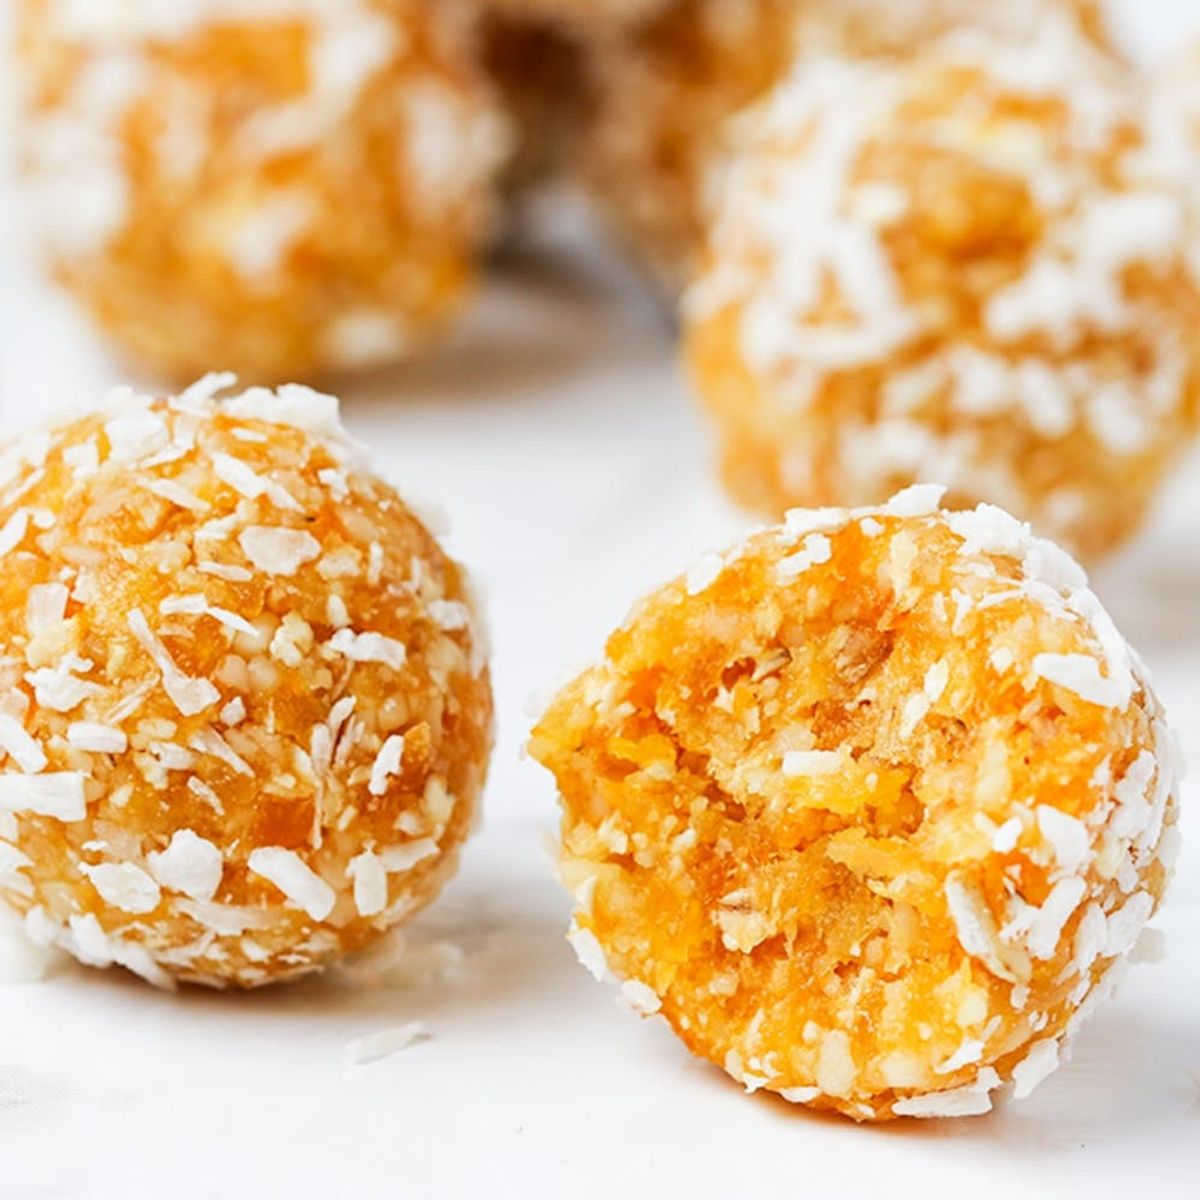 This Apricot Balls Recipe Is the Perfect Pre-Gym Snack